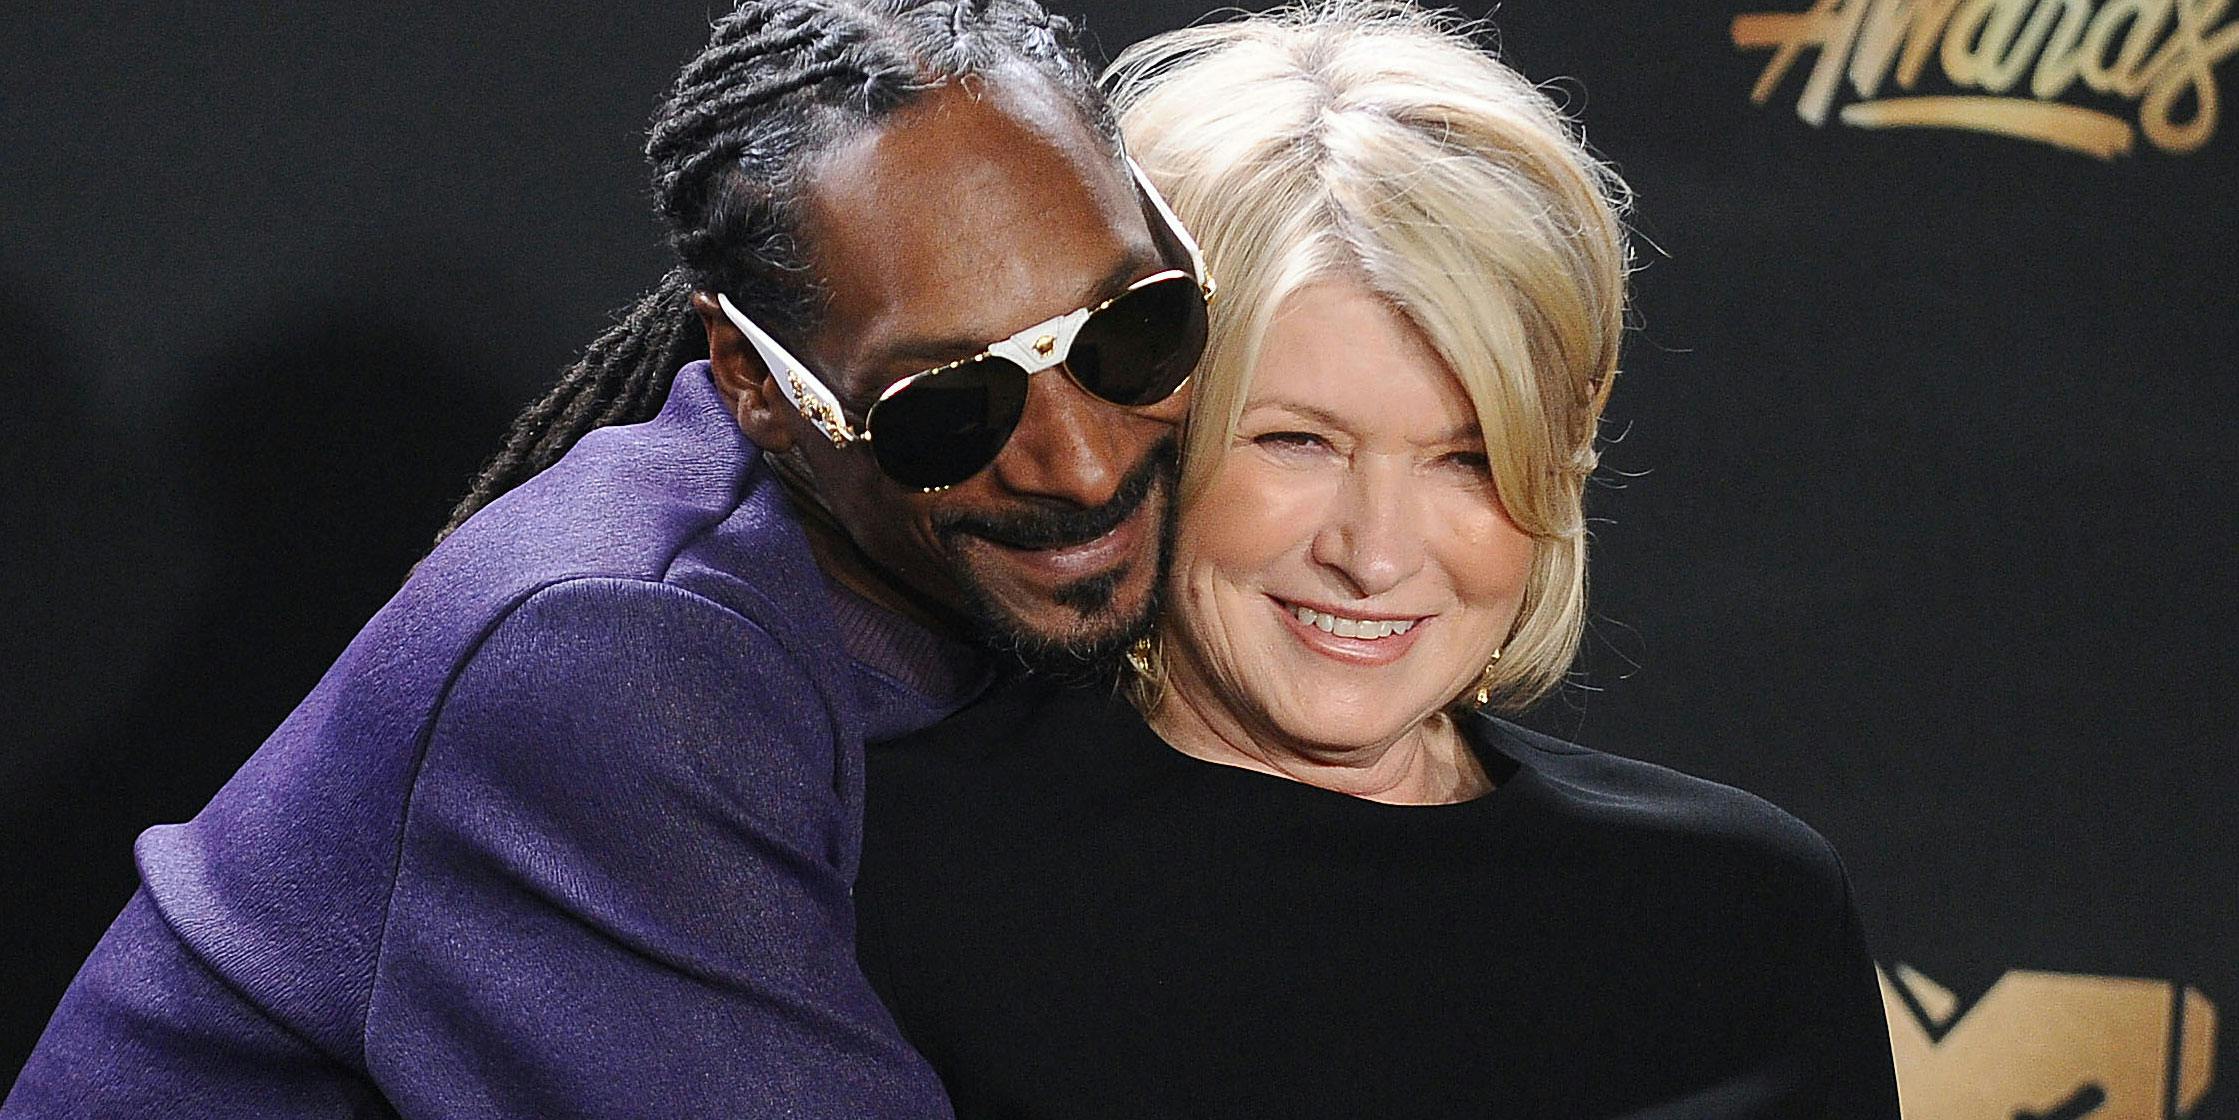 Longtime friends Snoop Dogg and Martha Stewart embrace. The duo recently released the Snoop Dogg and Martha Stewart Cookbook with tons of food cannabis enthusiasts will love.